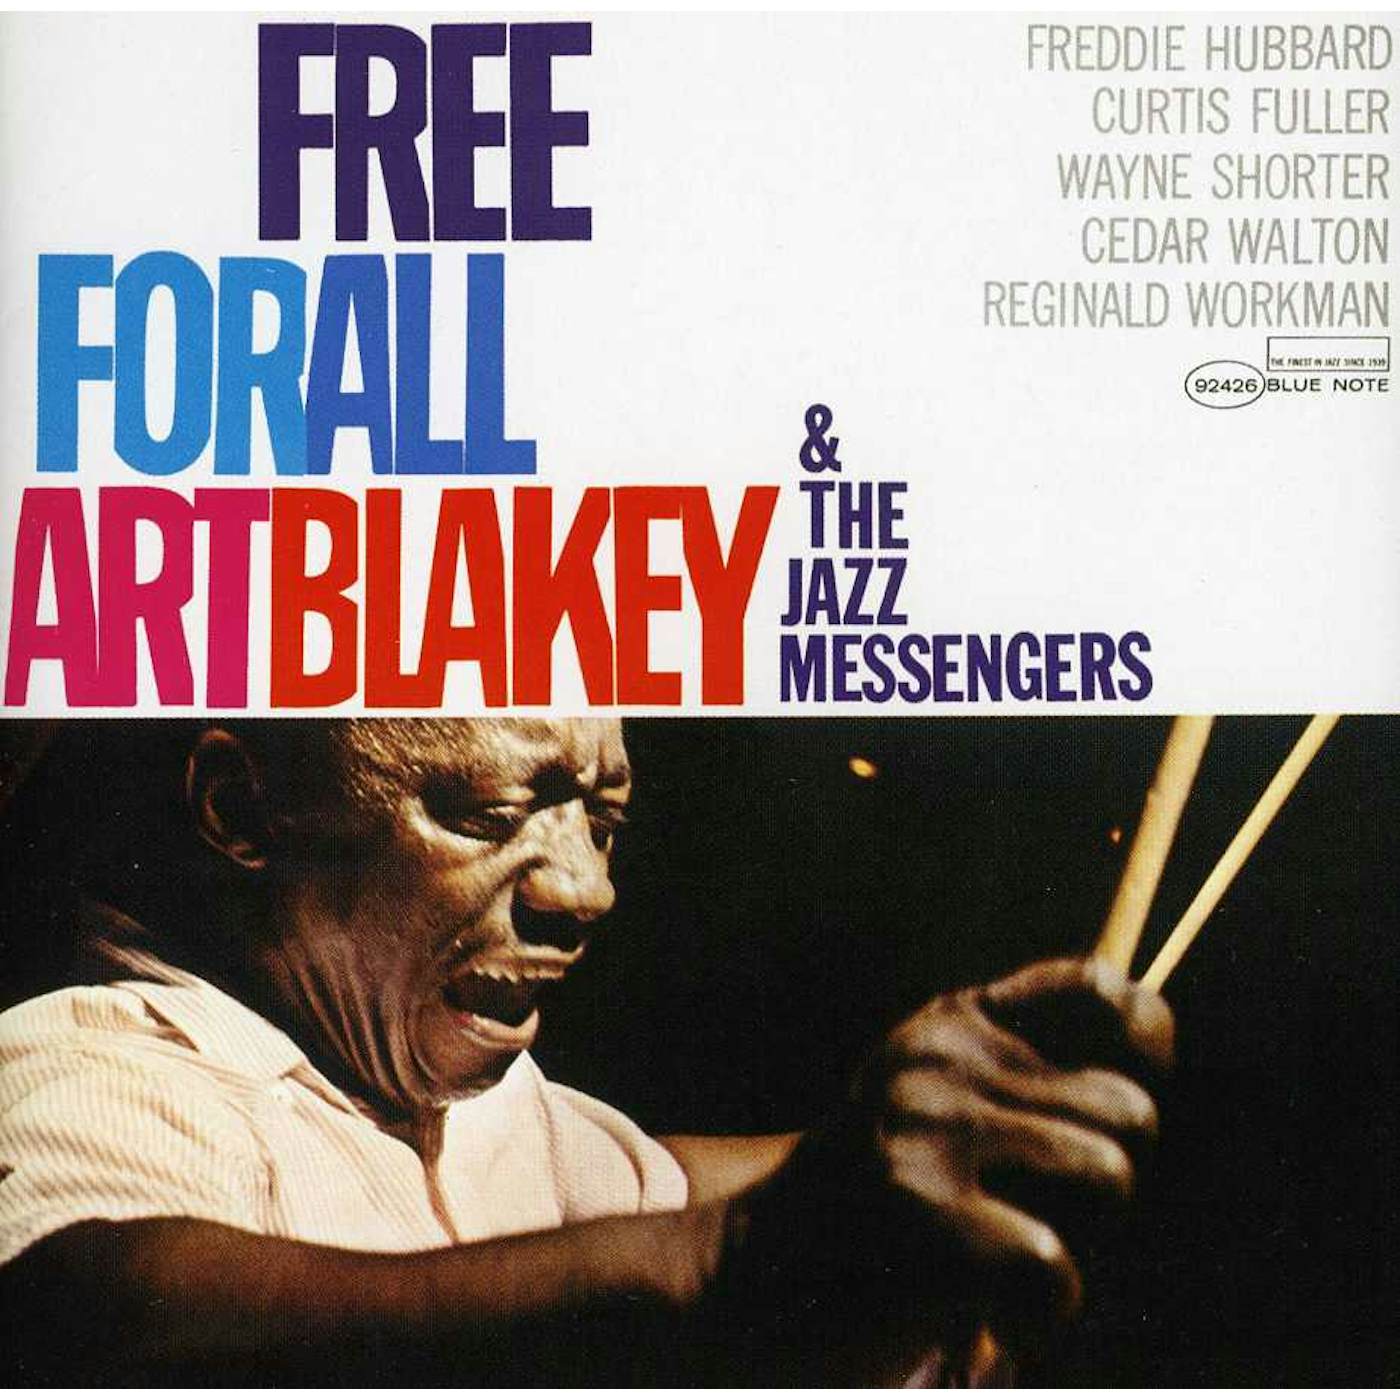 Art Blakey & The Jazz Messengers FREE FOR ALL CD